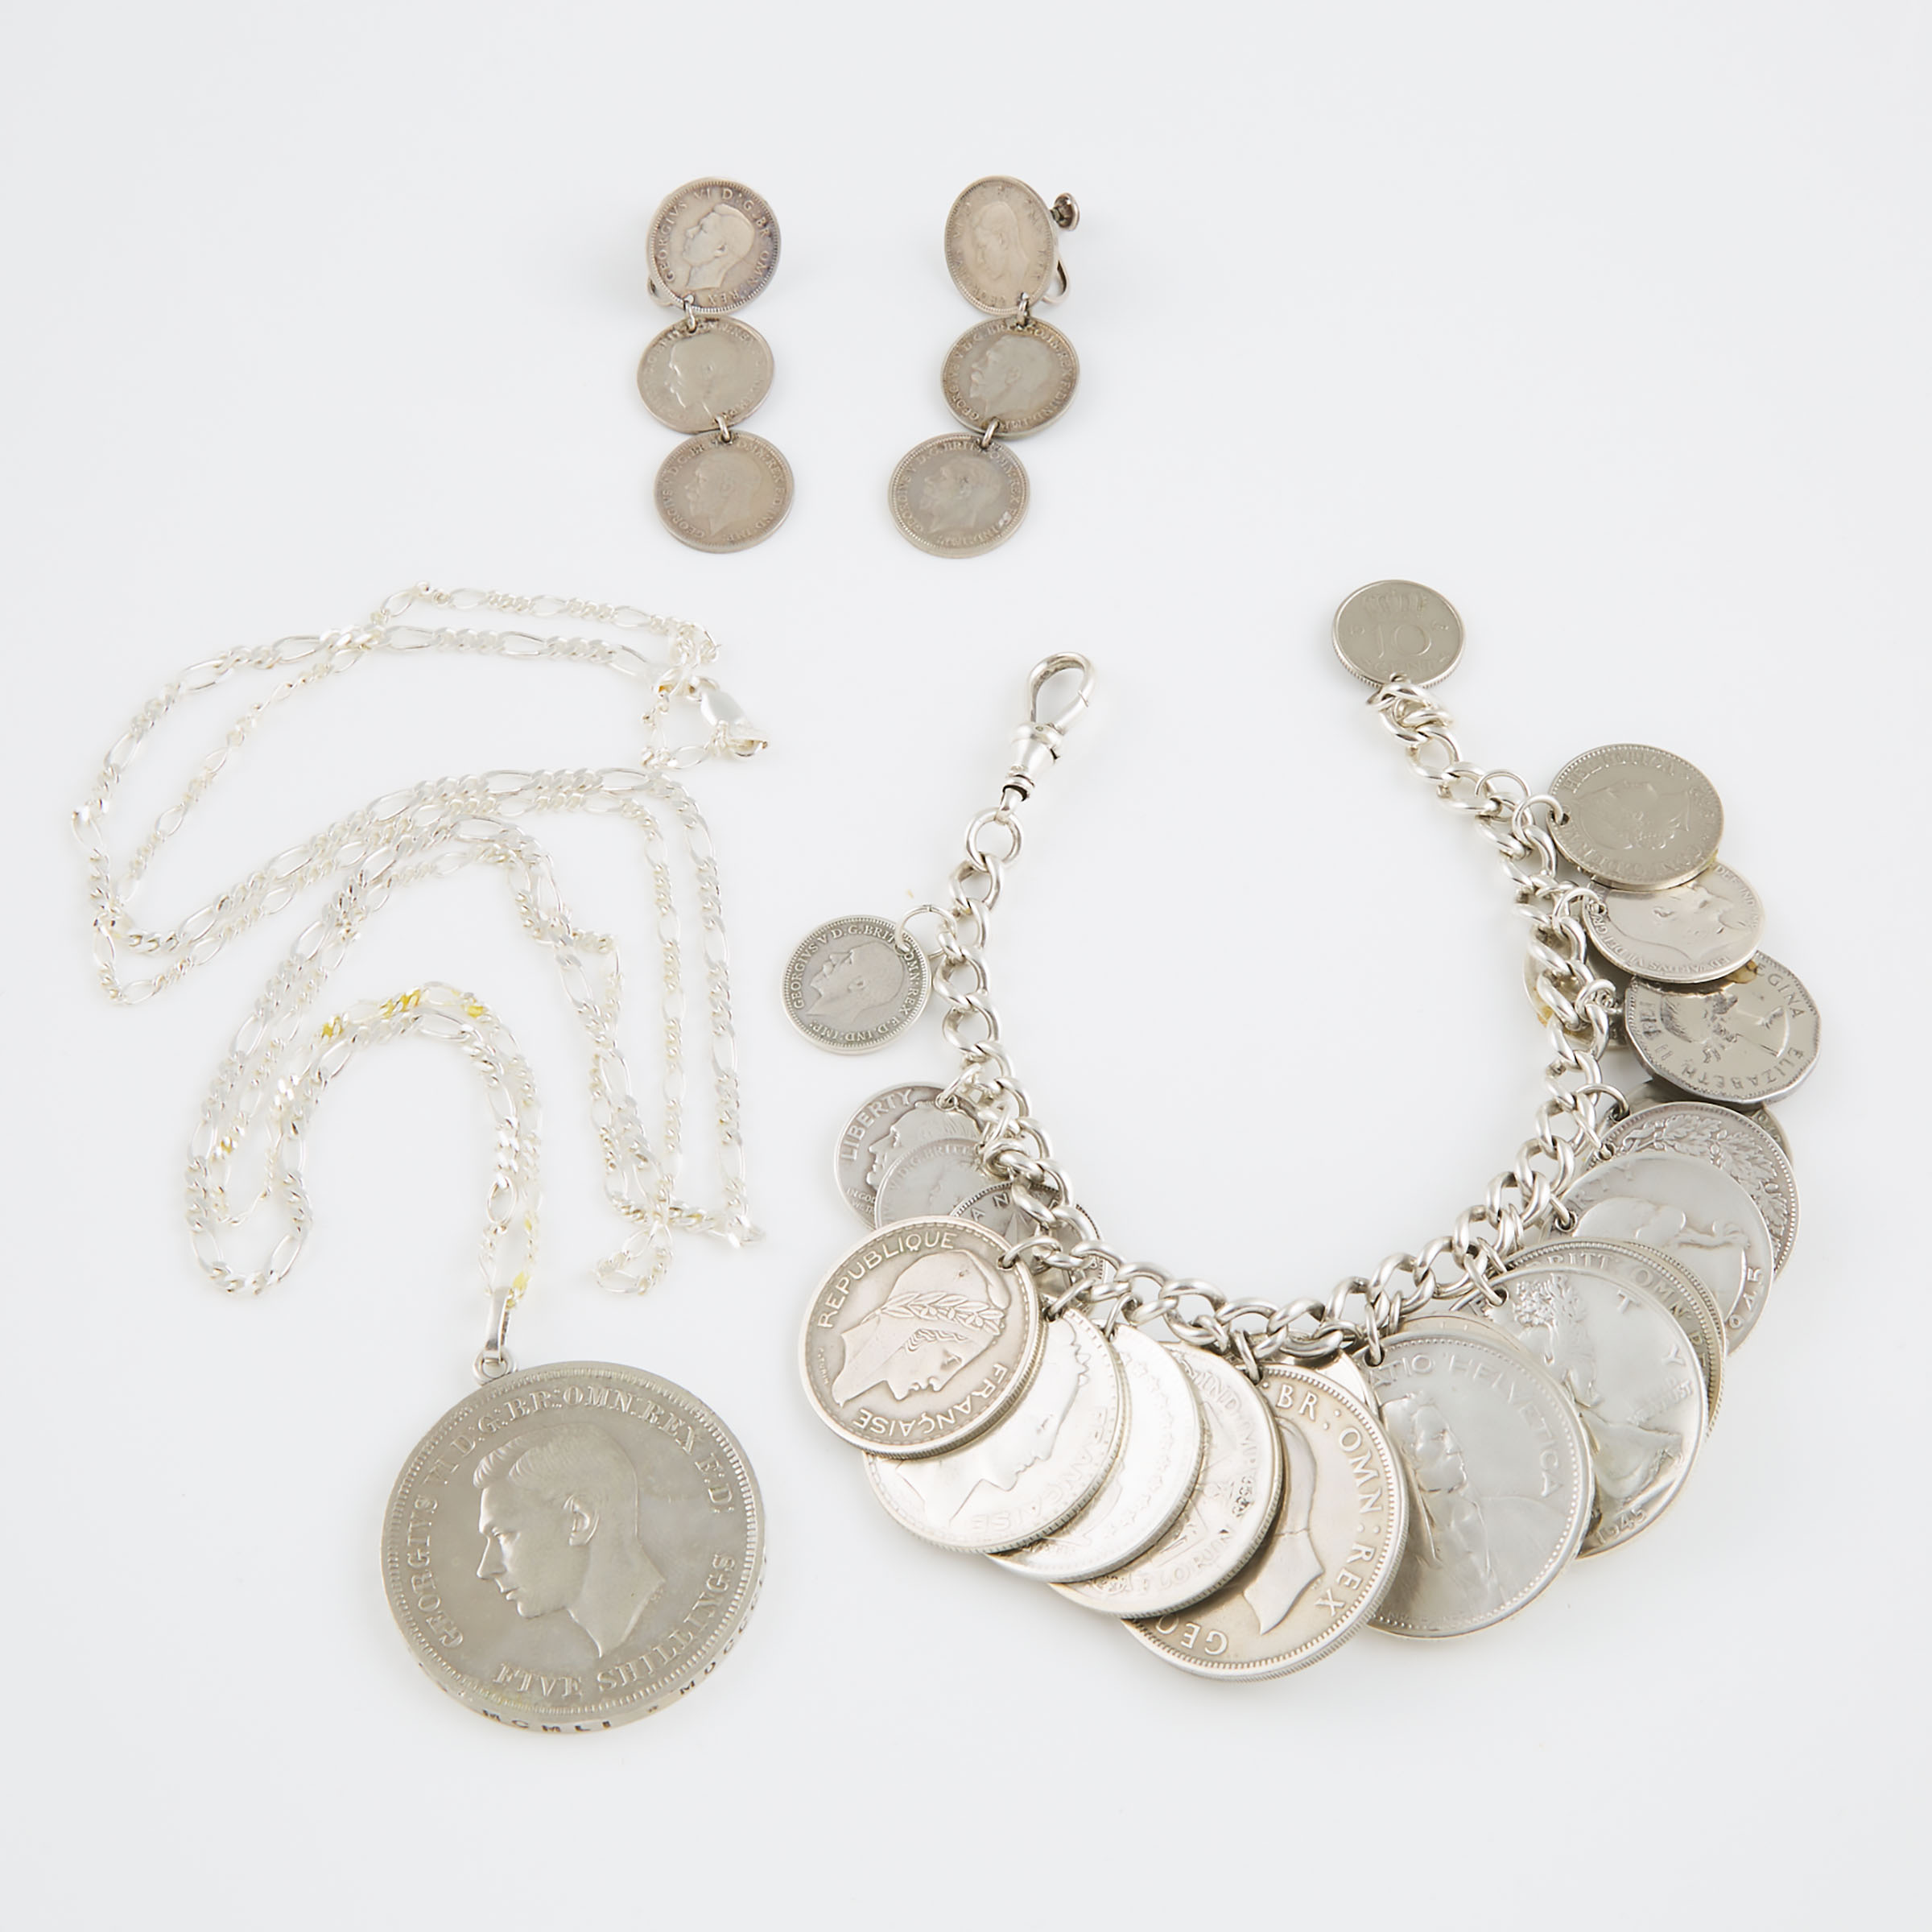 Small Quantity Of Silver Coin Jewellery